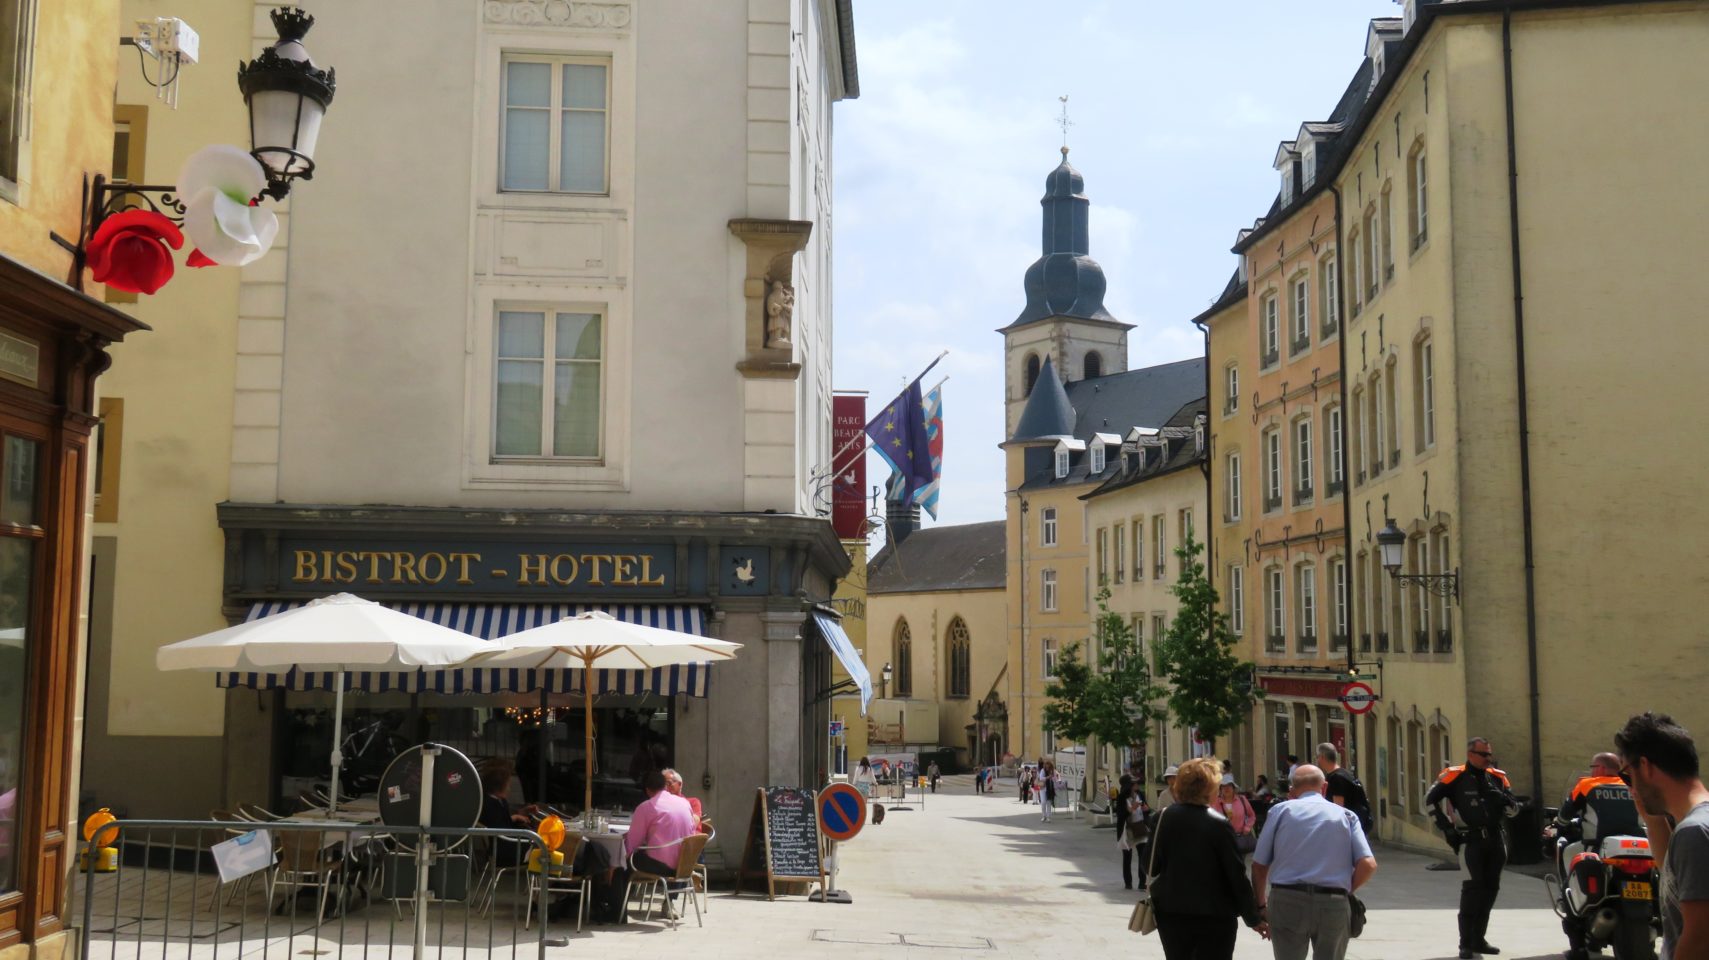 Strolling thru the Ville Haute (Upper Town) of Luxembourg City, Luxembourg